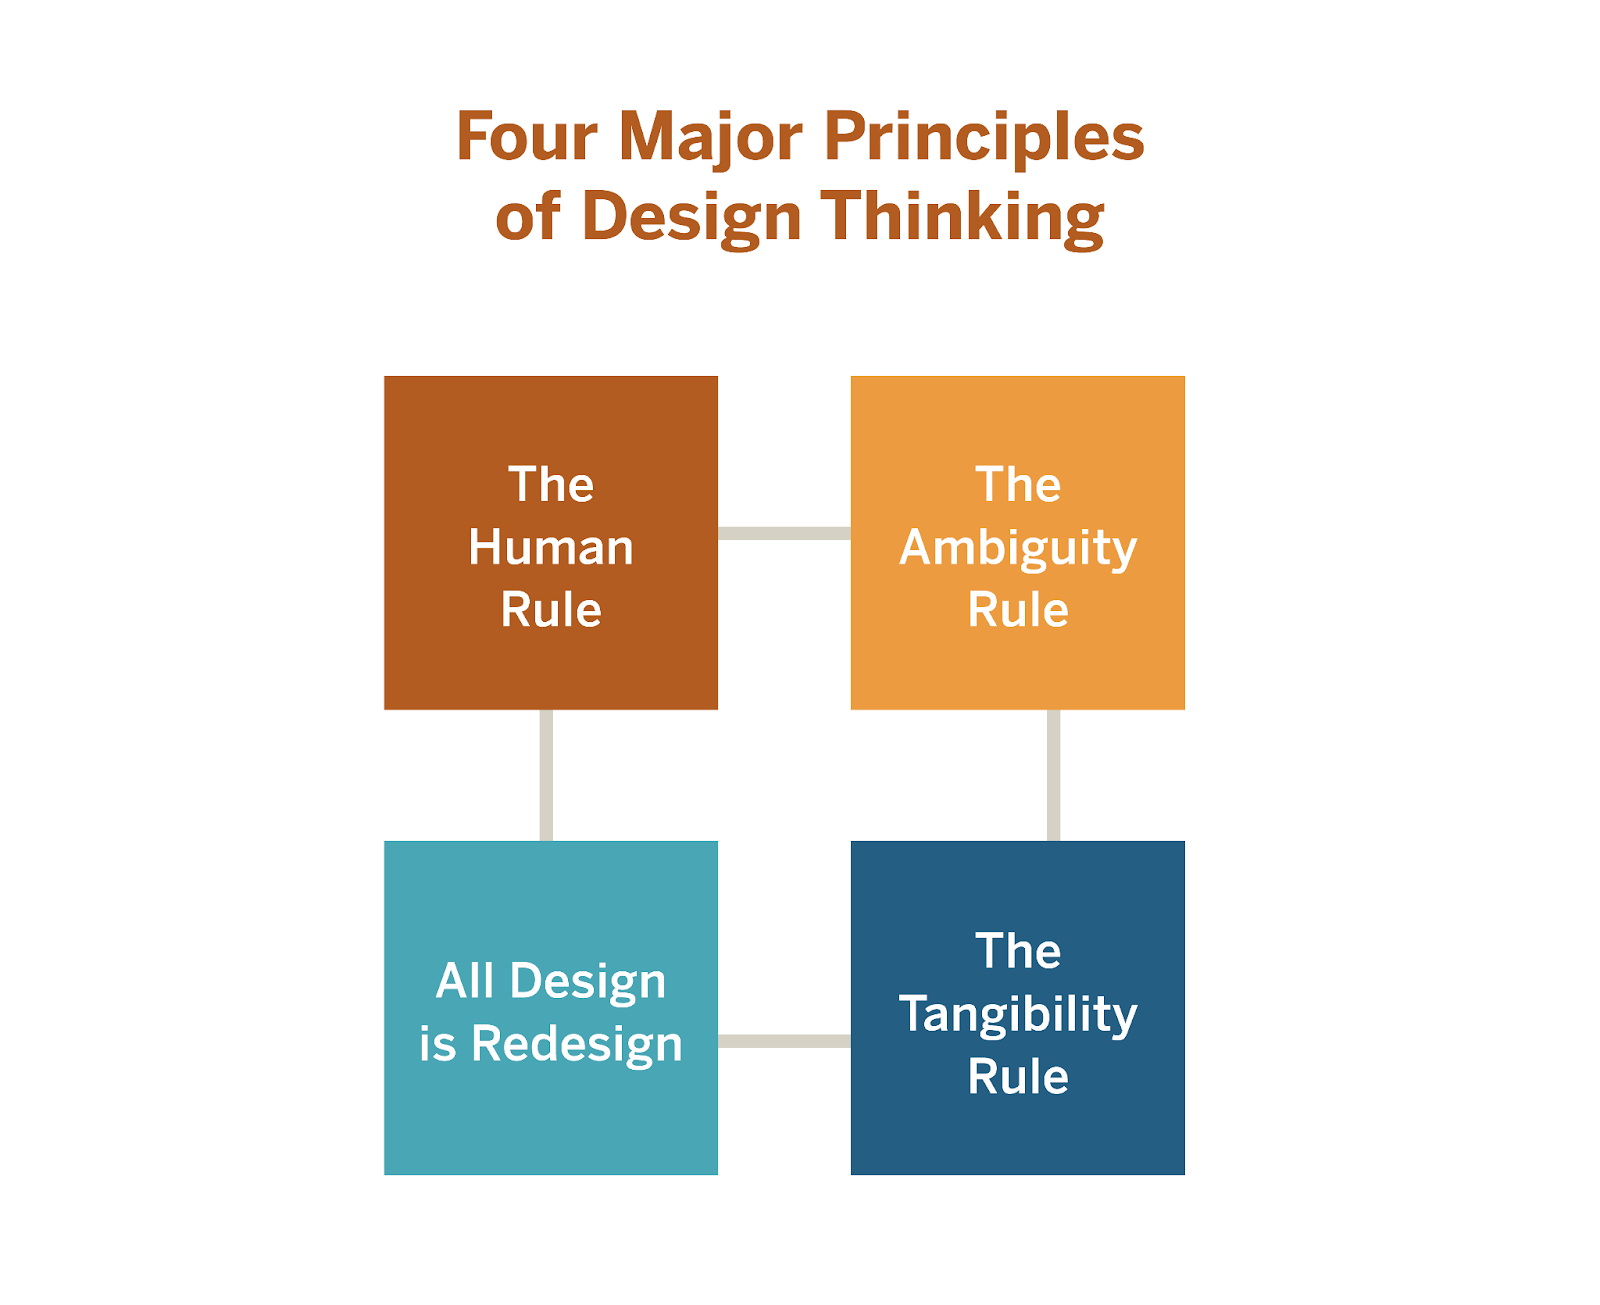 A graphic that highlights the four major principles in design thinking.